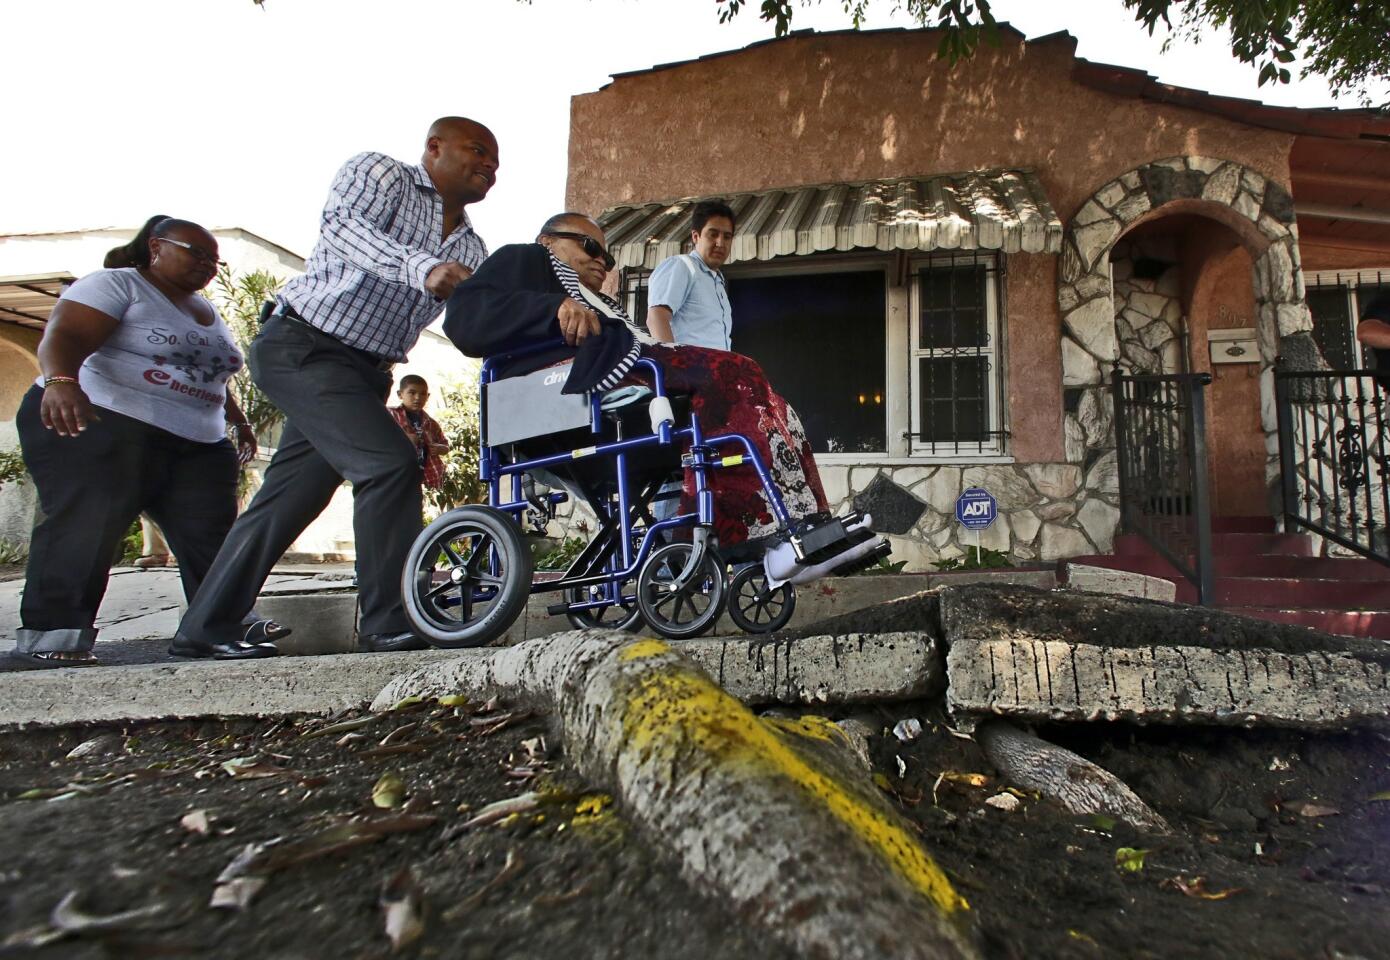 Bernard Parks Jr., chief of staff of Councilman Bernard Parks, pushes Helen Young, 80, in a wheelchair over a broken sidewalk in front her home on West Century Boulevard in Los Angeles, where Councilman Parks and the L.A. Neighborhood Initiative marked the start of several sidewalk repair projects.